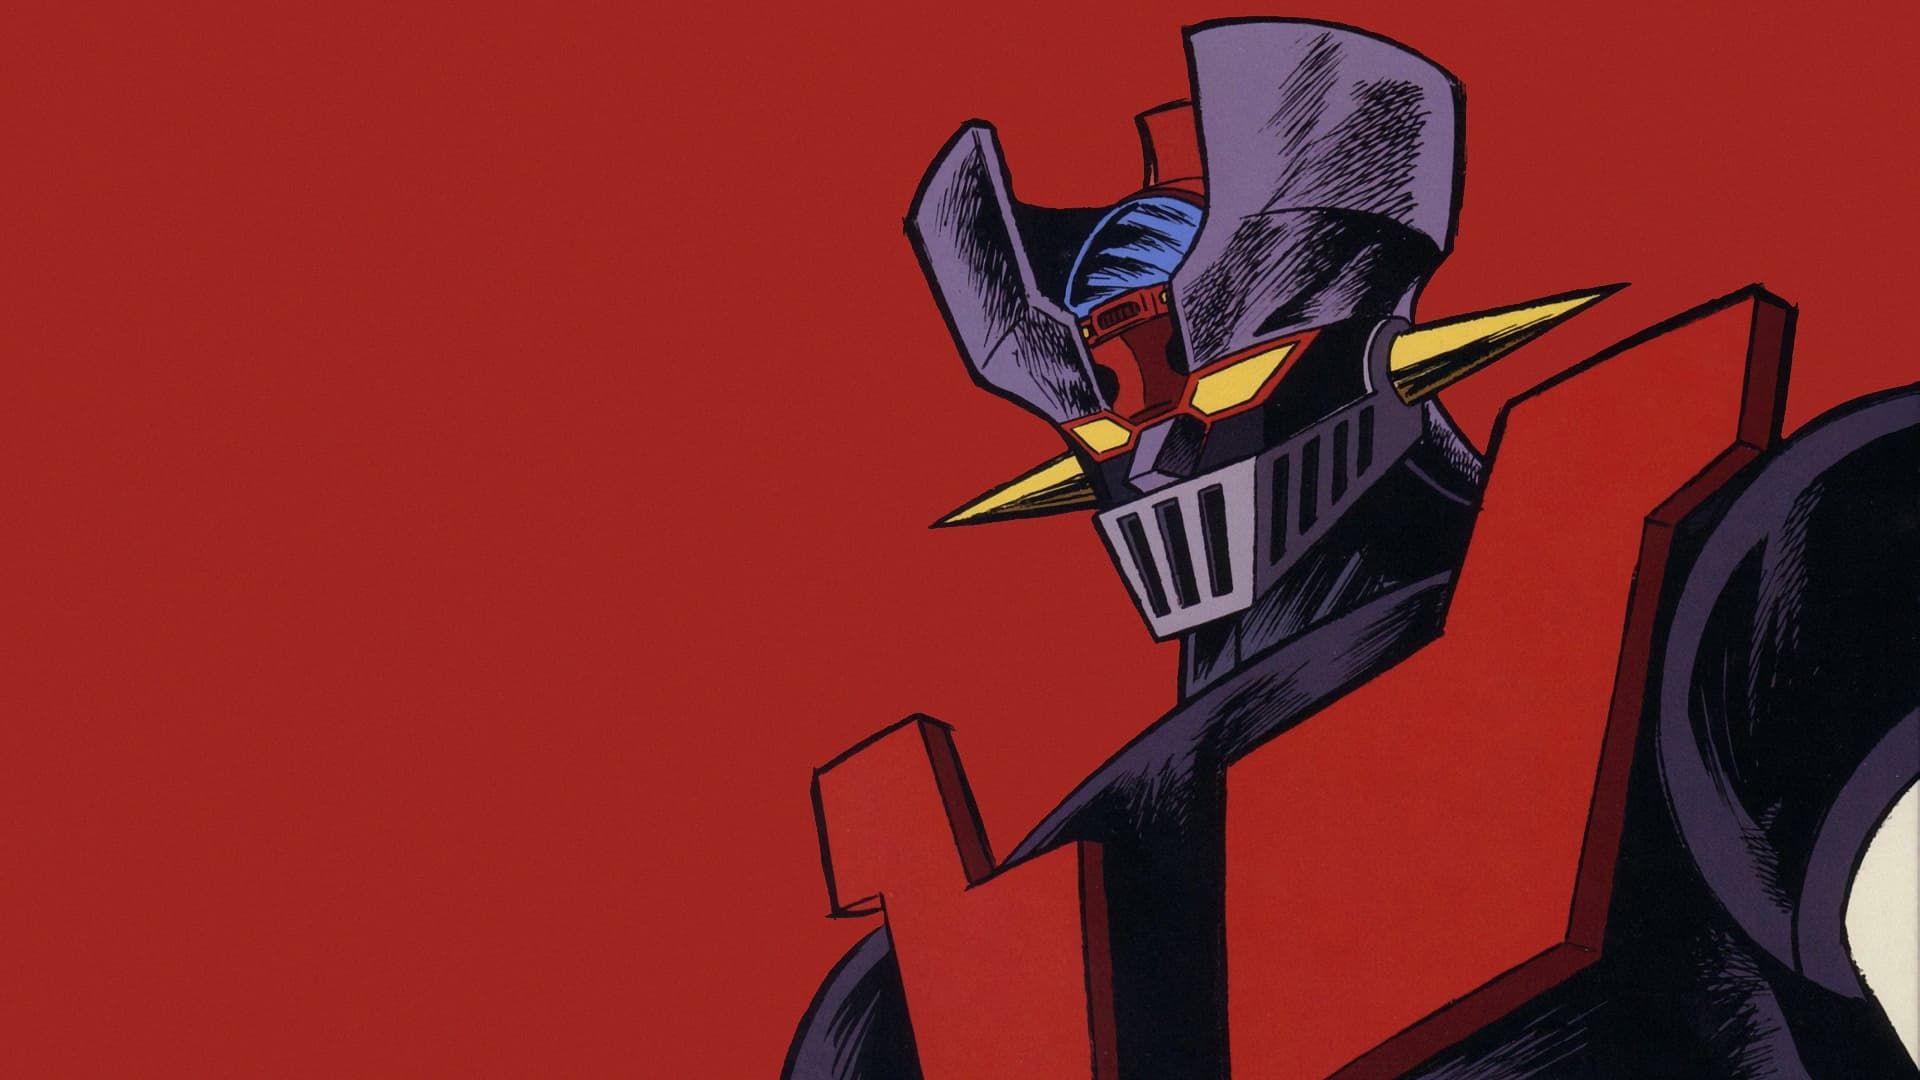 Mazinger Edition Z: The Impact! background